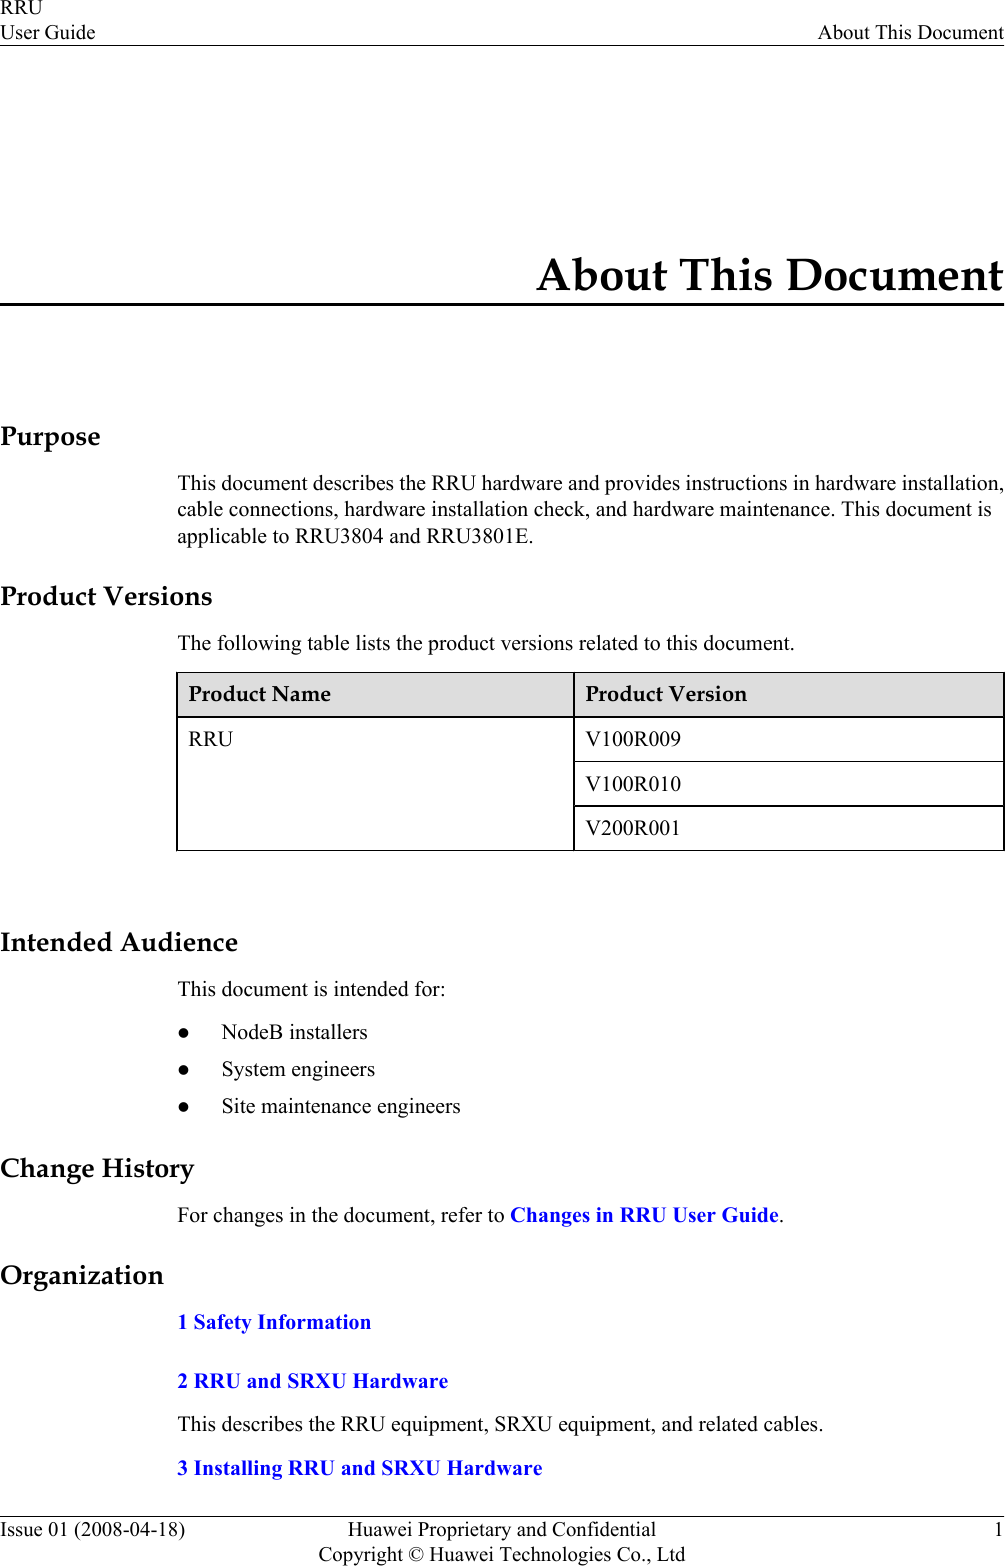 About This DocumentPurposeThis document describes the RRU hardware and provides instructions in hardware installation,cable connections, hardware installation check, and hardware maintenance. This document isapplicable to RRU3804 and RRU3801E.Product VersionsThe following table lists the product versions related to this document.Product Name Product VersionRRU V100R009V100R010V200R001 Intended AudienceThis document is intended for:lNodeB installerslSystem engineerslSite maintenance engineersChange HistoryFor changes in the document, refer to Changes in RRU User Guide.Organization1 Safety Information2 RRU and SRXU HardwareThis describes the RRU equipment, SRXU equipment, and related cables.3 Installing RRU and SRXU HardwareRRUUser Guide About This DocumentIssue 01 (2008-04-18) Huawei Proprietary and ConfidentialCopyright © Huawei Technologies Co., Ltd1